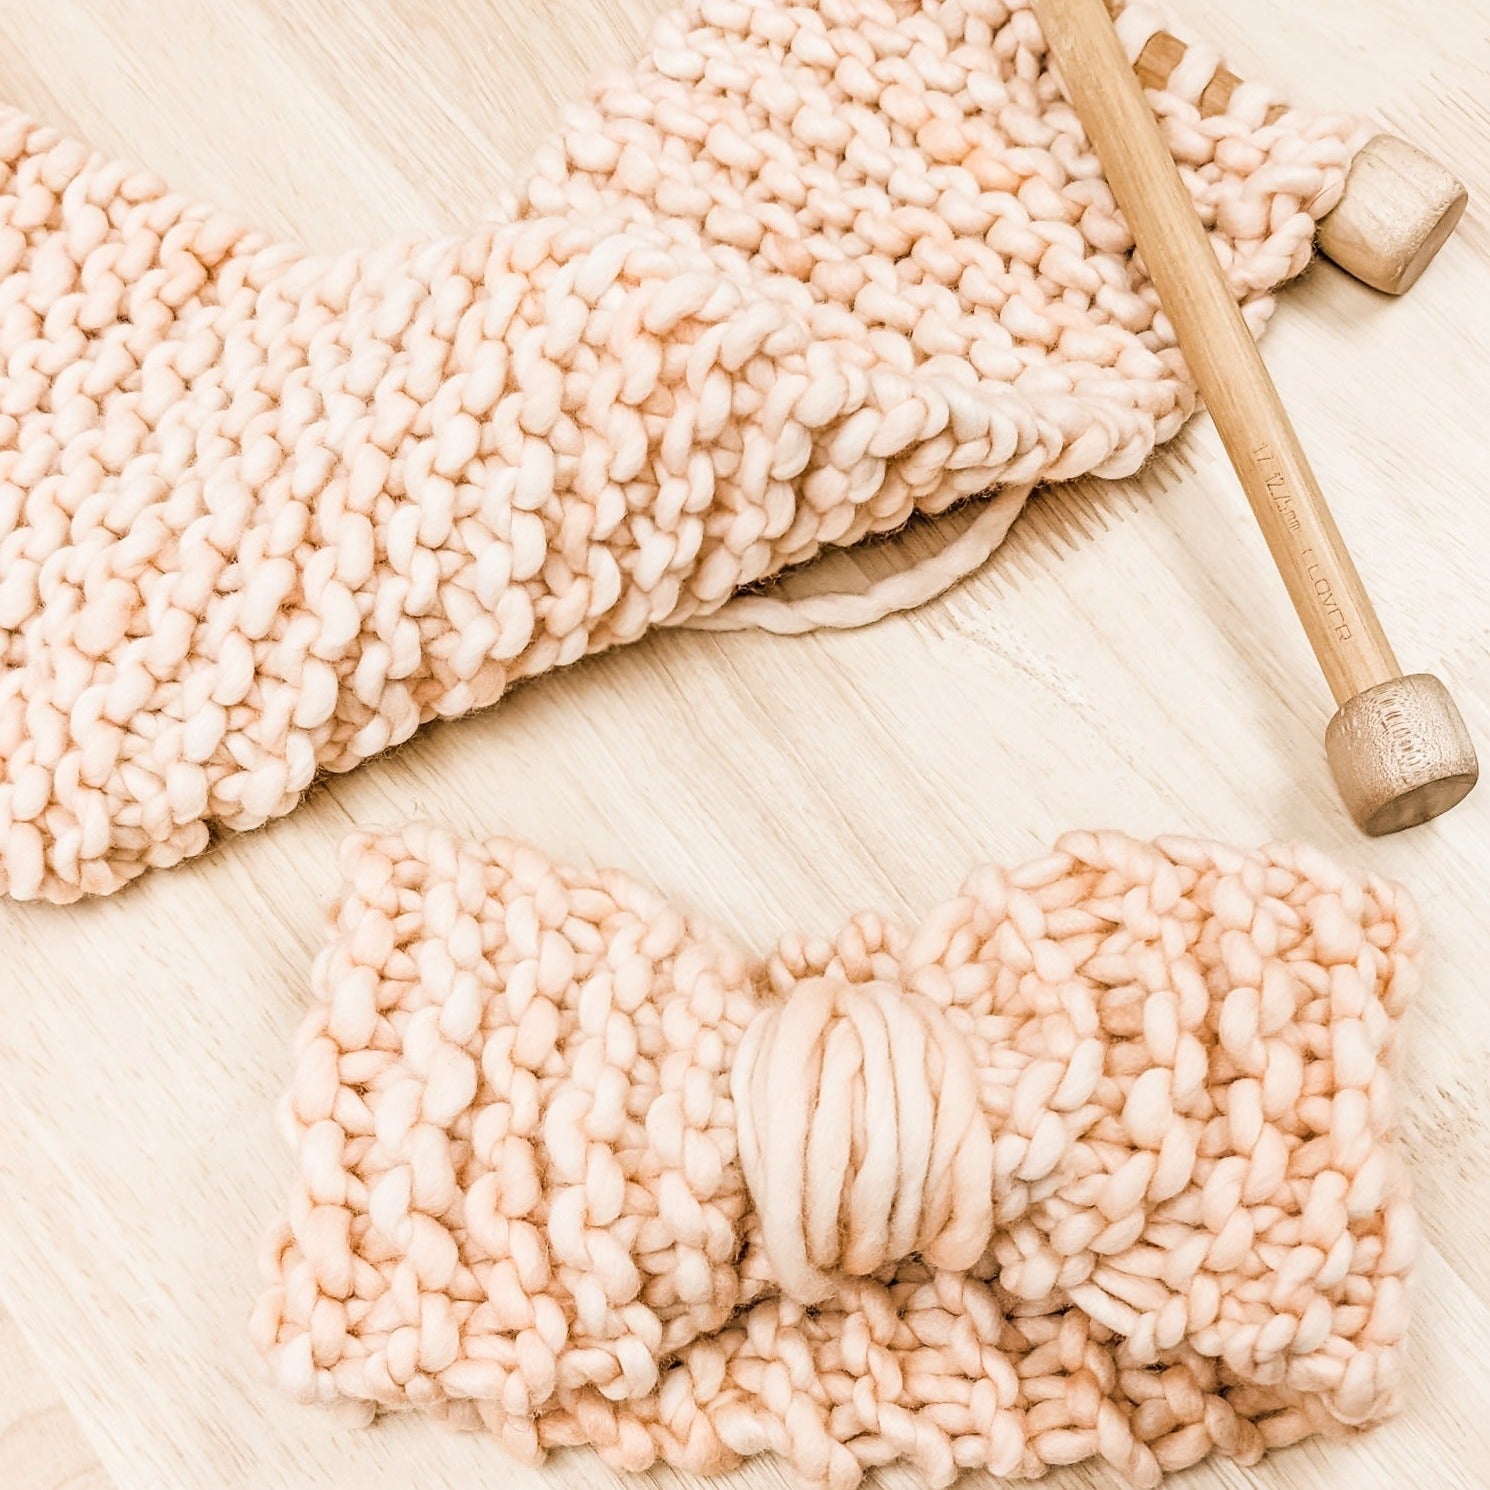 Beginner Knitting 101 Class - Materials Includedhomesewn